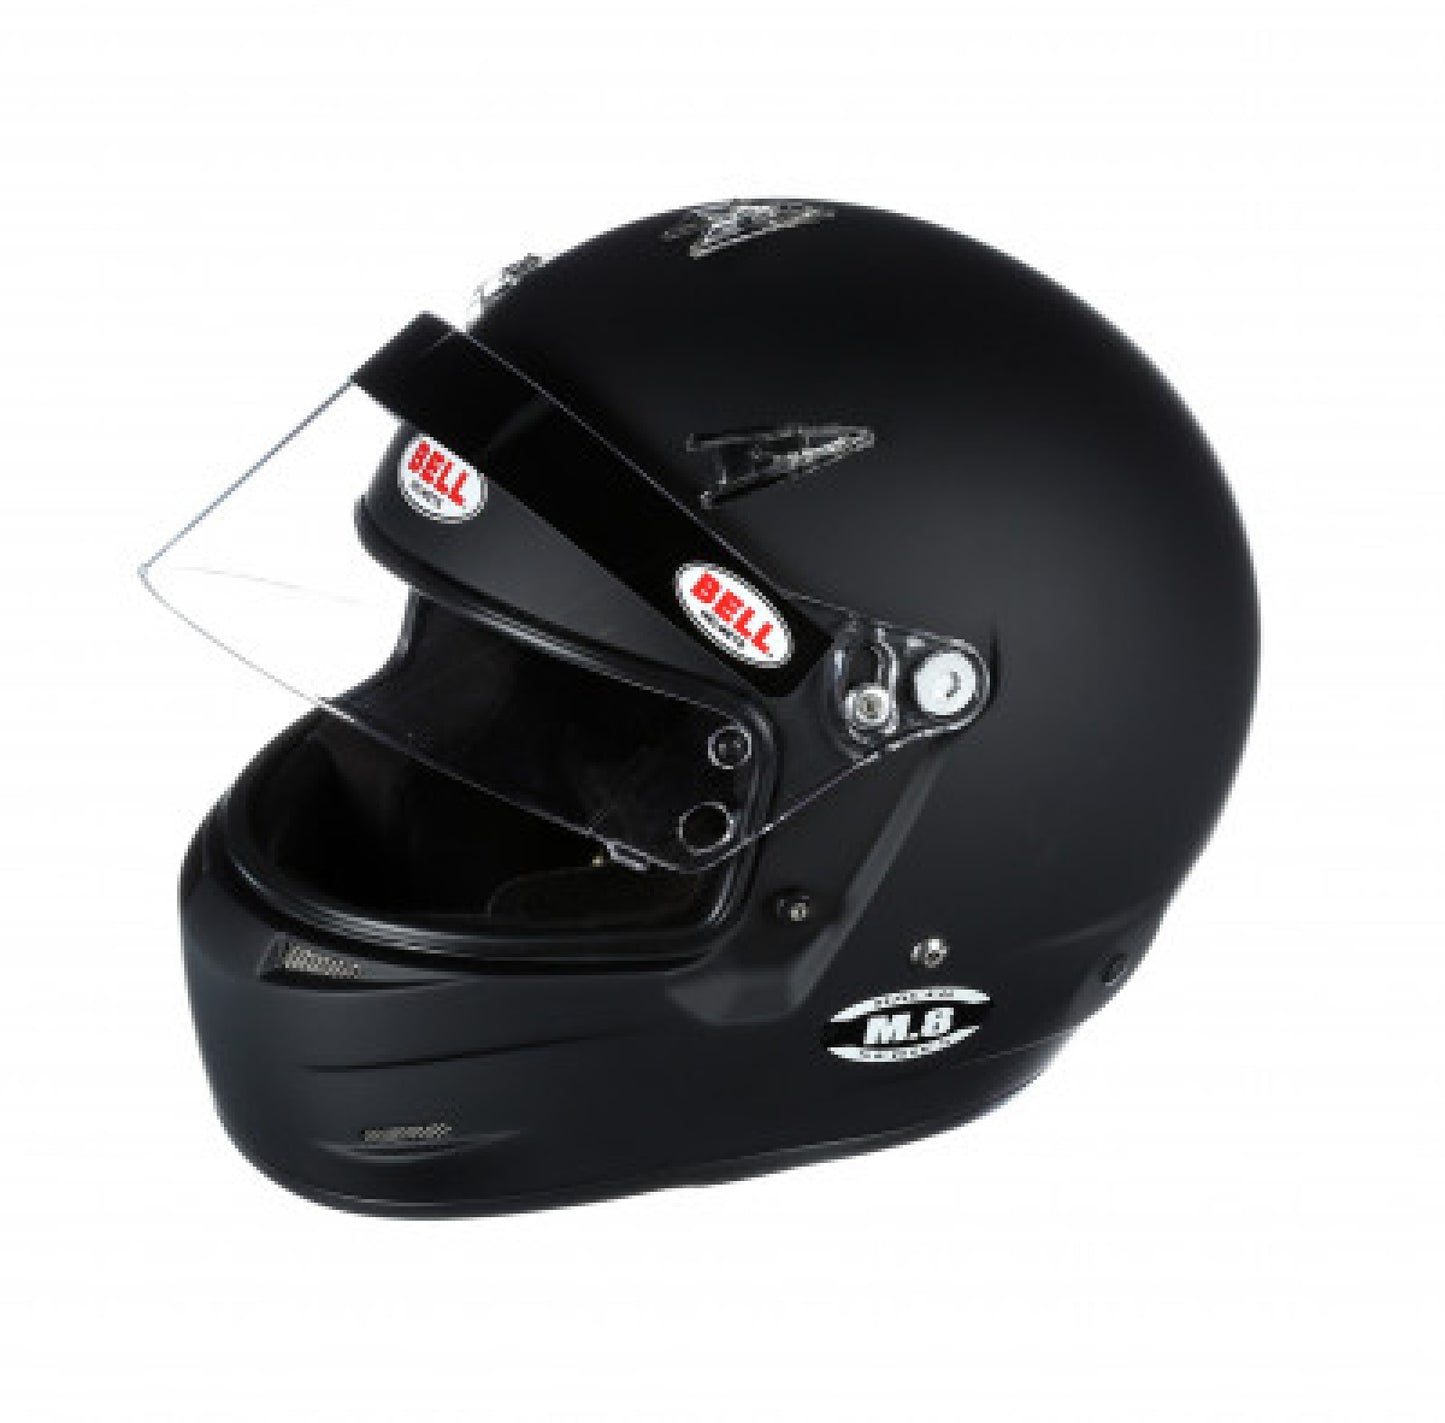 Bell M8 Racing Helmet-Matte Black Size Extra Large 1419A16